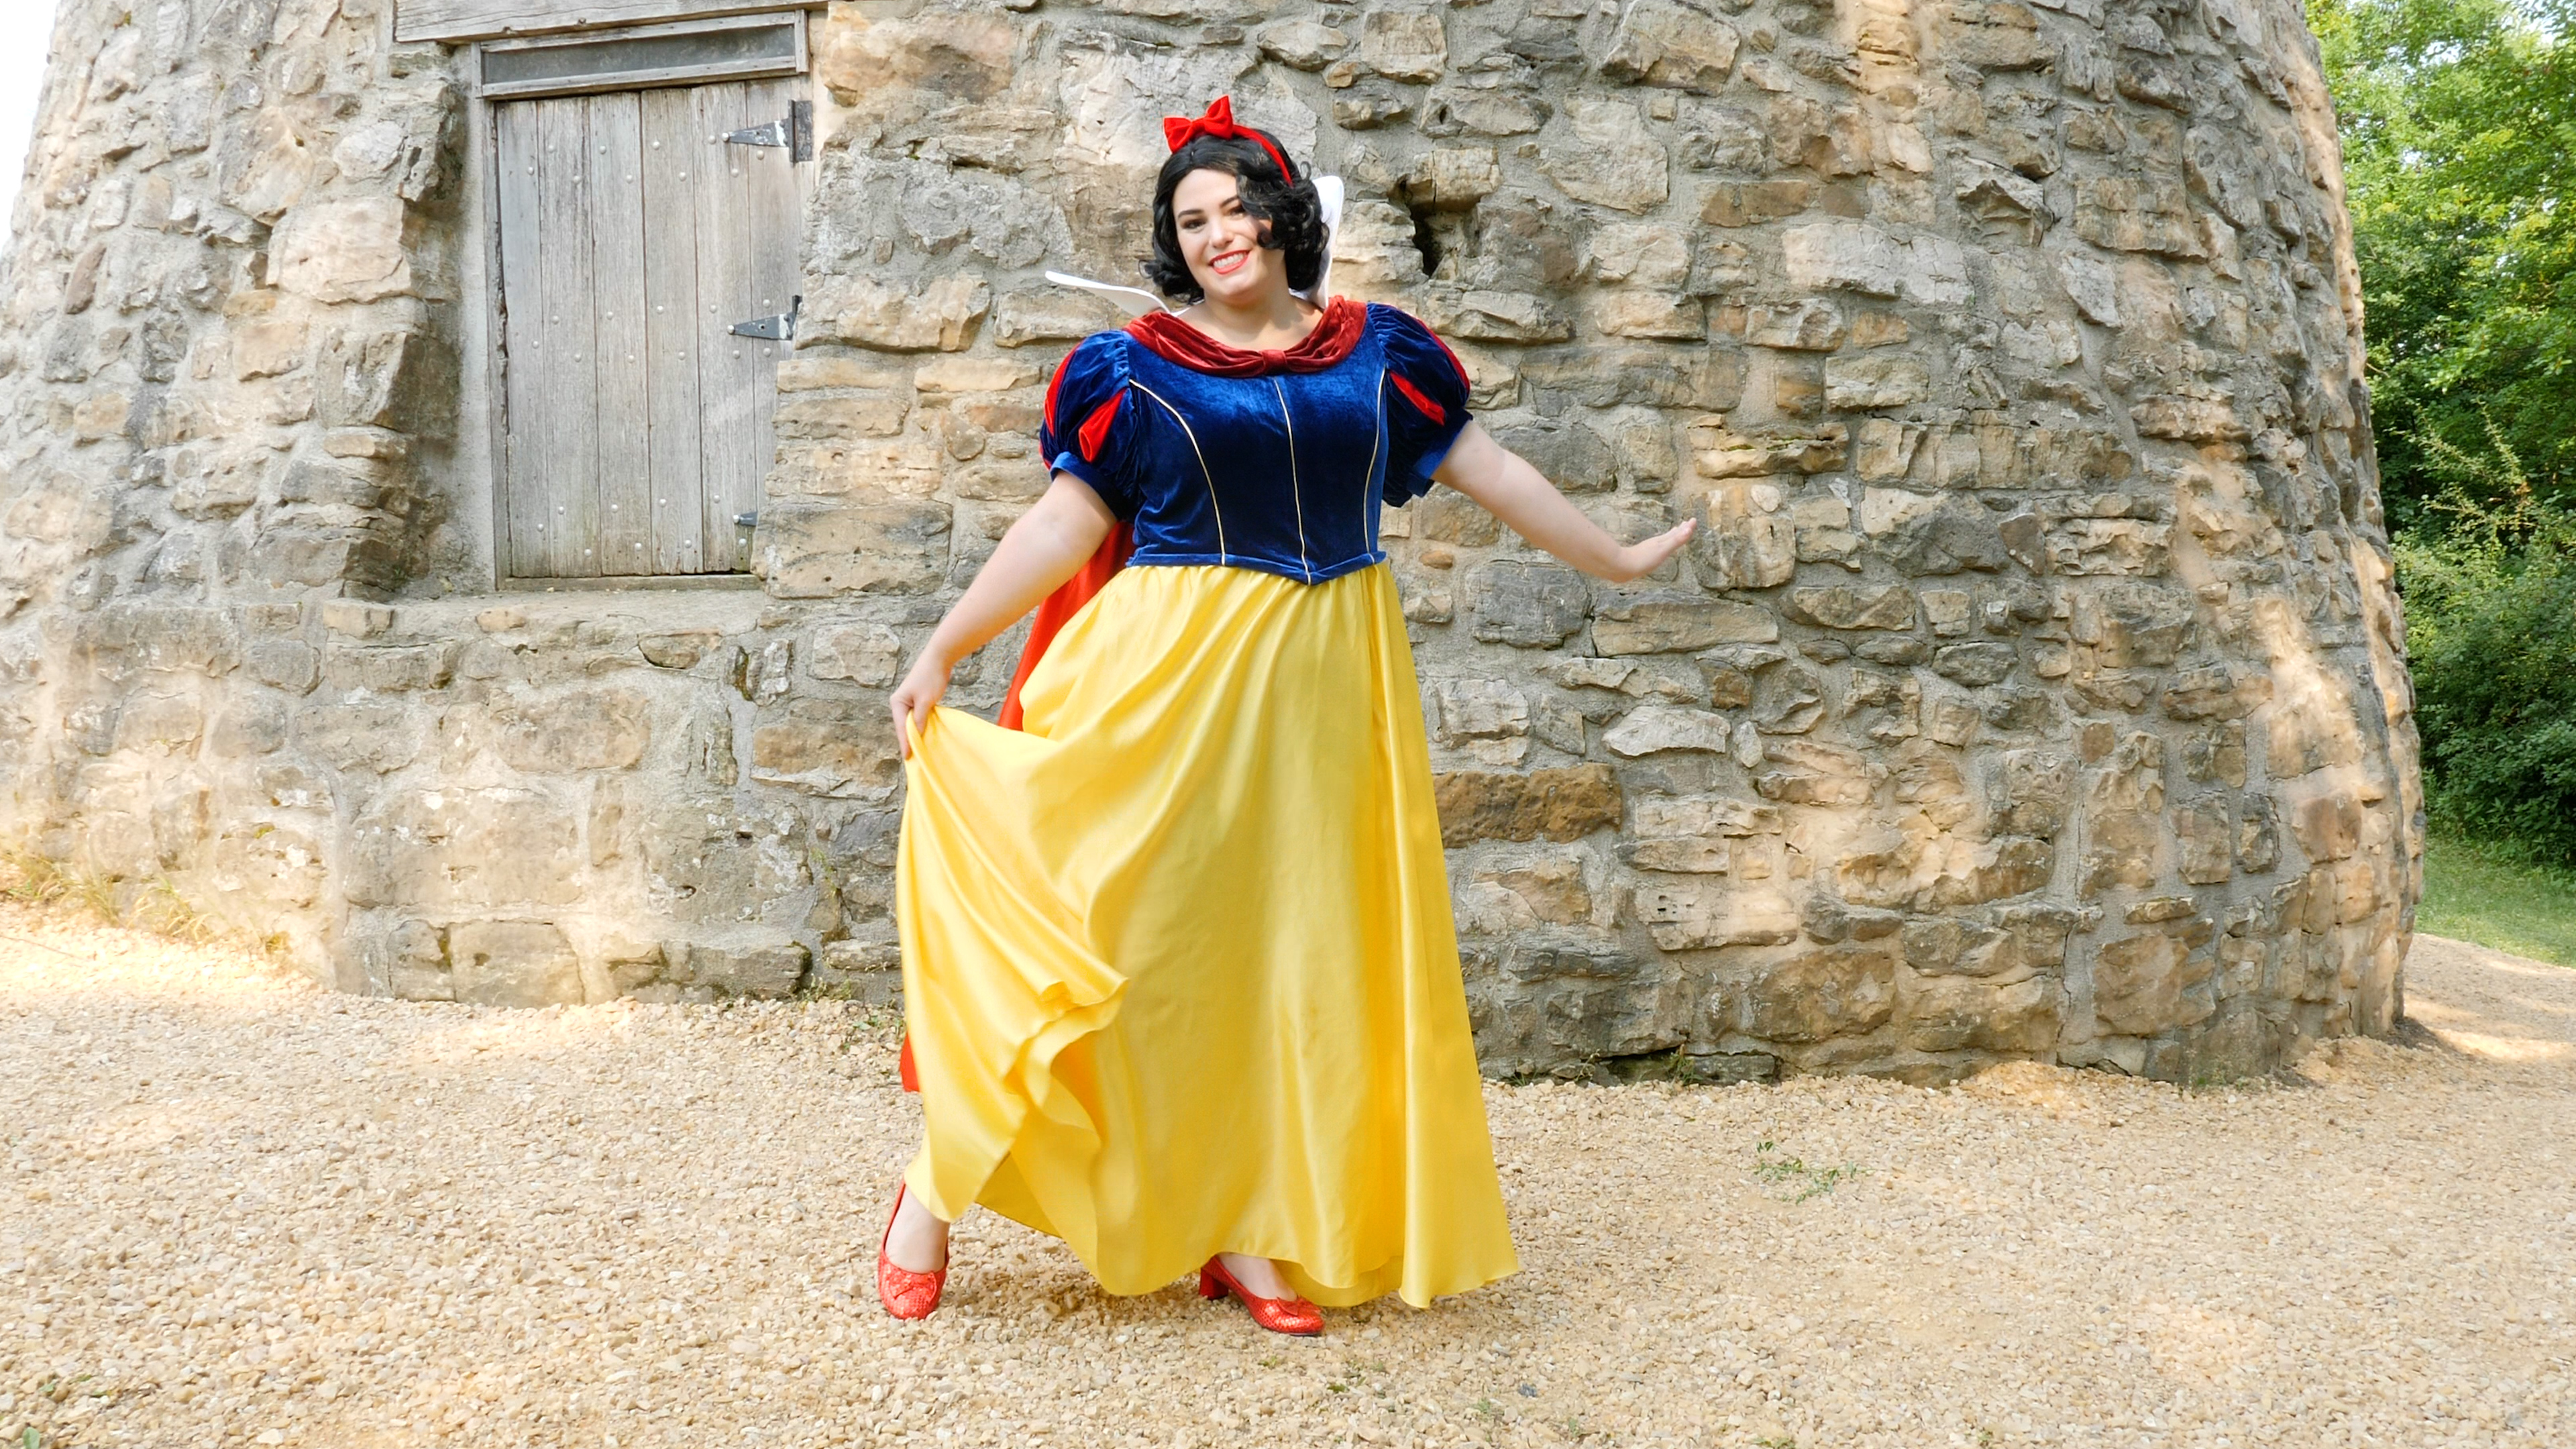 Halloweencostumes.com 7x Women Disney Adult Snow White Plus Size Costume  Womens, Fairy Tale Princess Dress Official Halloween Outfit.,  Yellow/blue/red : Target